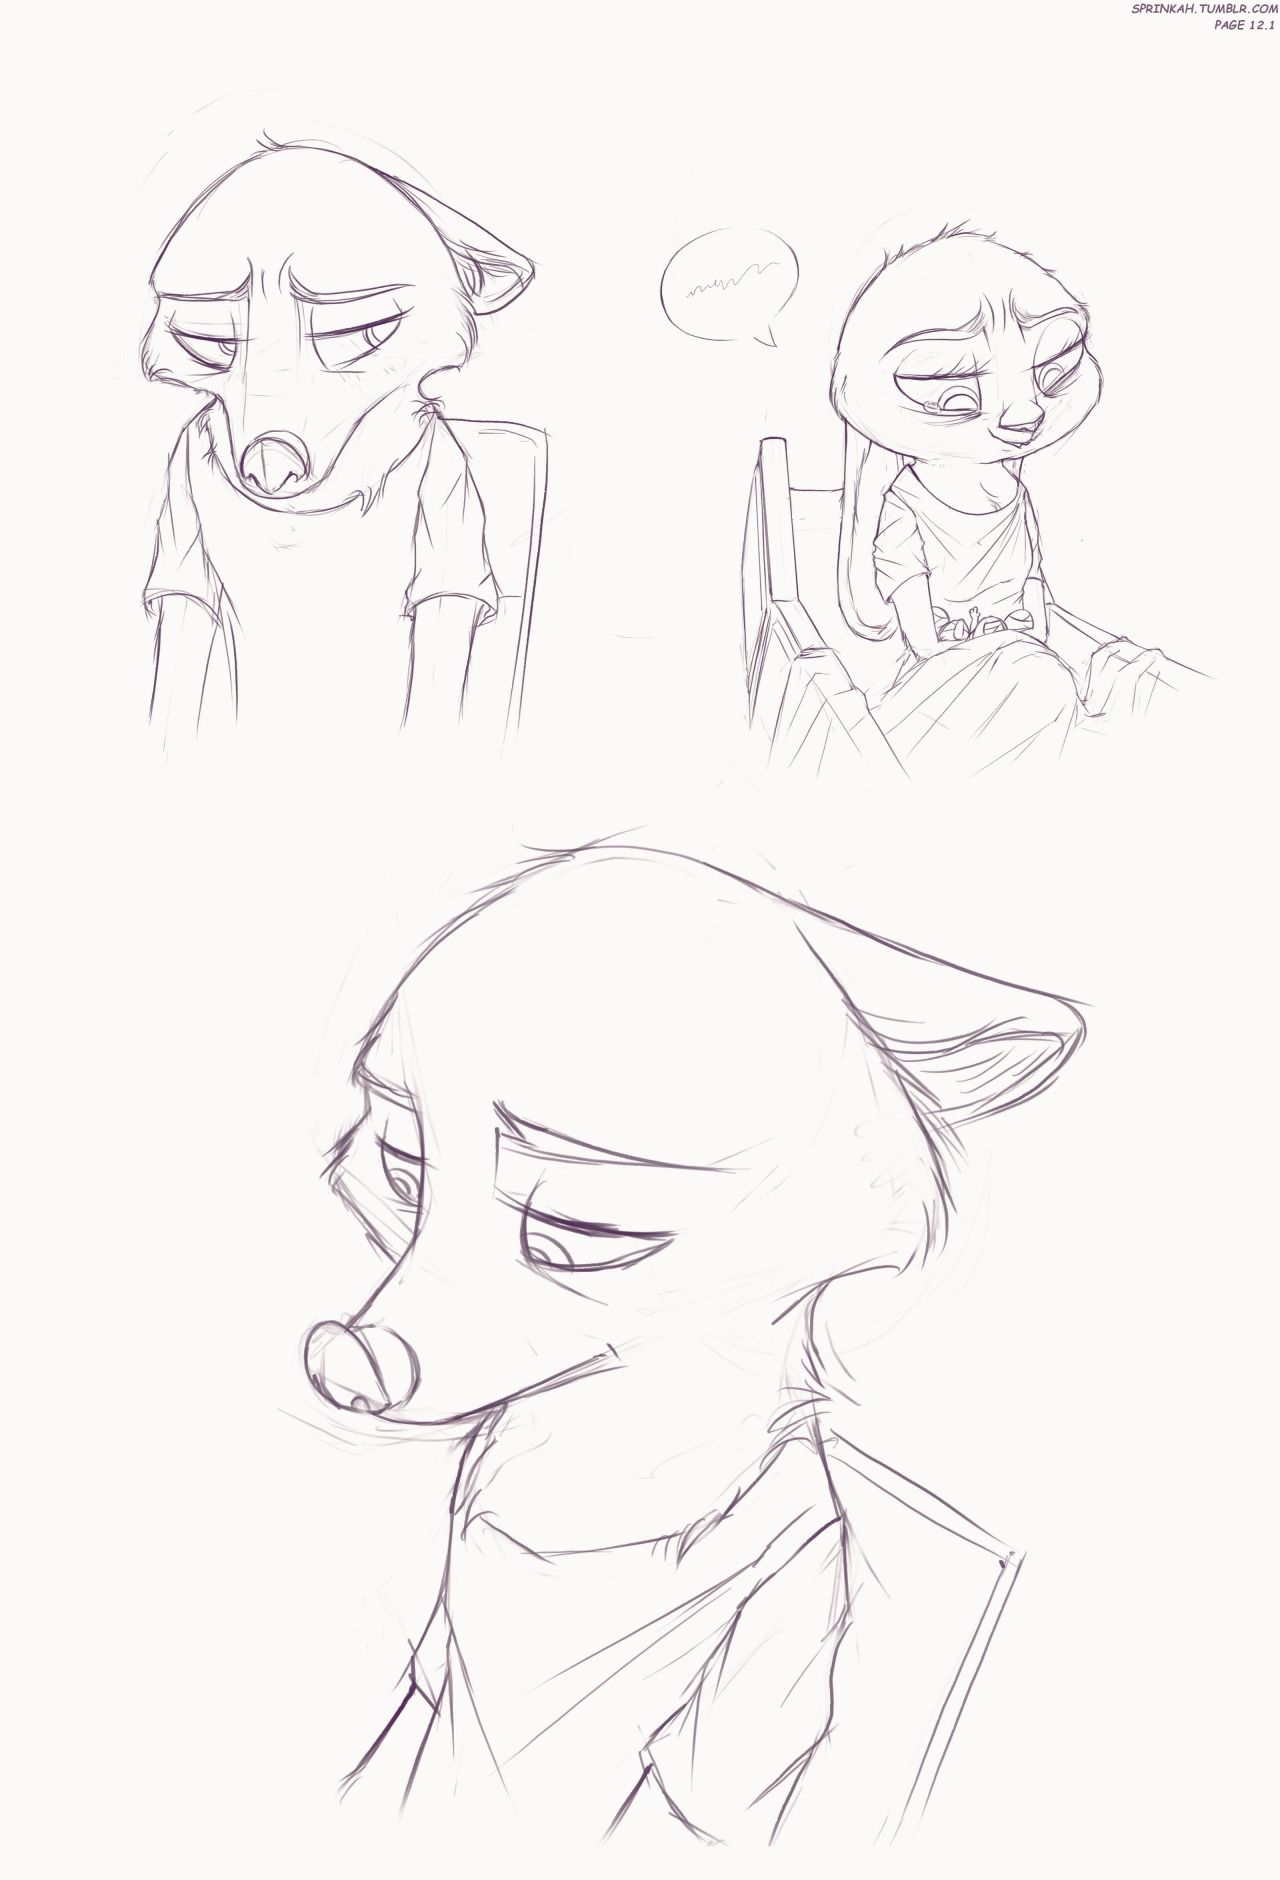 [Sprinkah] This is what true love looks like (Zootopia) (Spanish) (On Going) [Landsec] http://sprinkah.tumblr.com/ 20